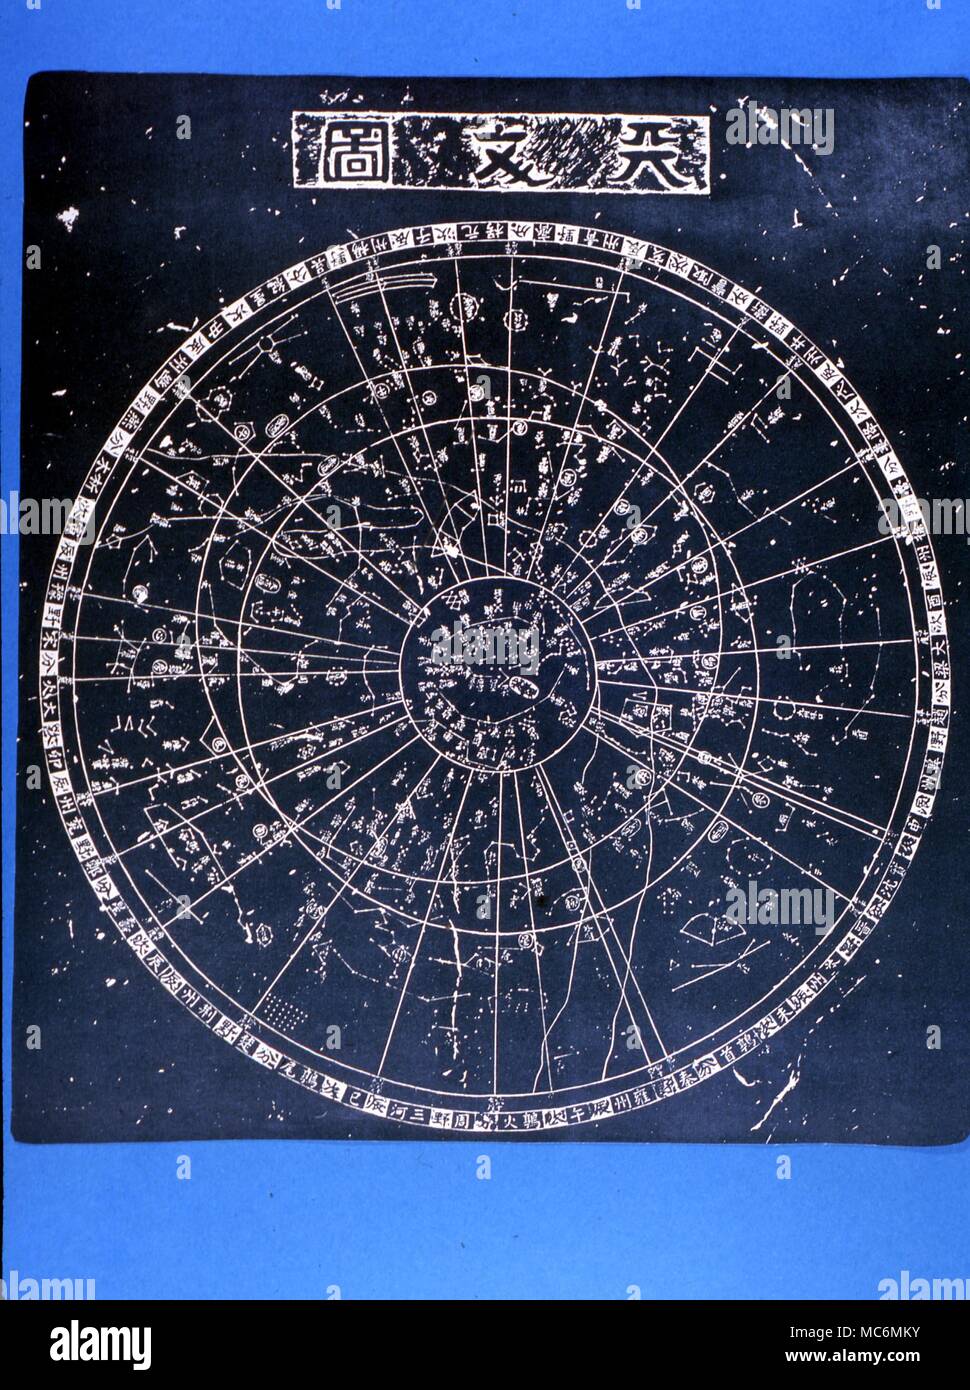 Chinese Astrology Ancient Chinese planisphere frottage, after the planisphere of Suzhou, the original of which is just over 2.16 metres high, and dated to 1247 AD (corresponding to the Southern Song Dynasy). The planisphere incorporates 1400 stars. Stock Photo